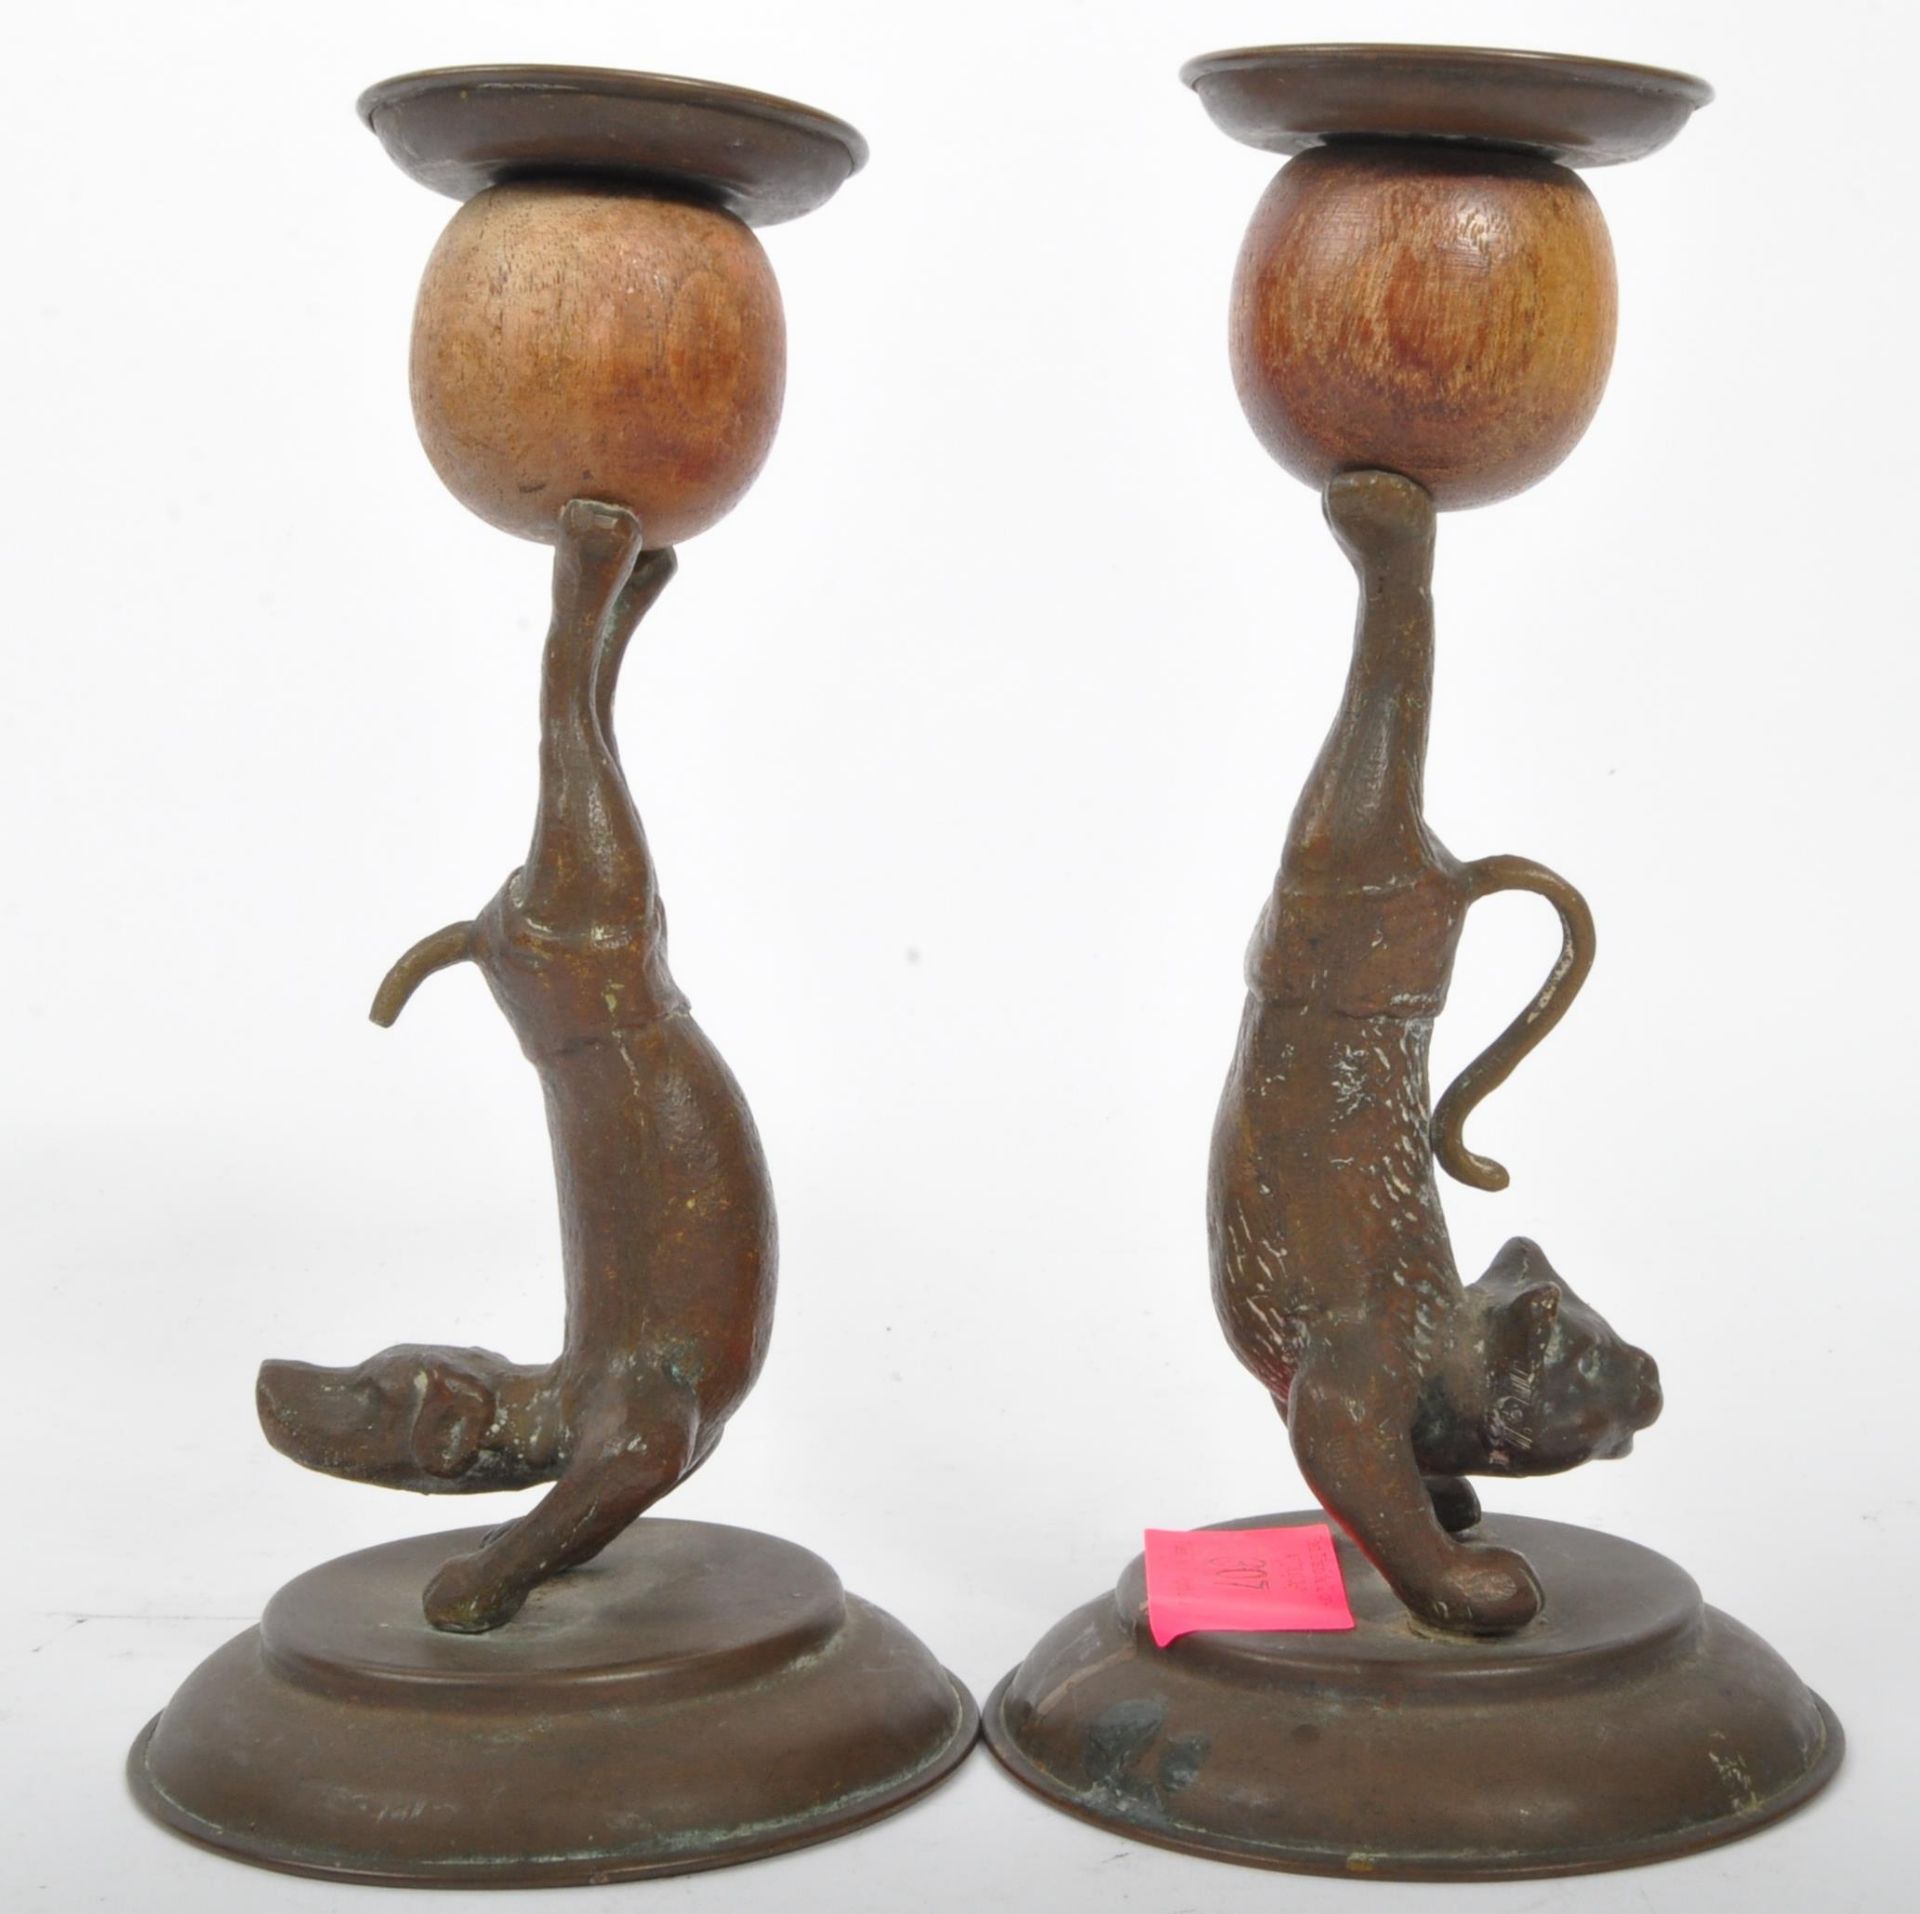 PAIR OF VINTAGE CIRCA 1970S ANIMAL CANDLE STICK HOLDERS - Image 2 of 5